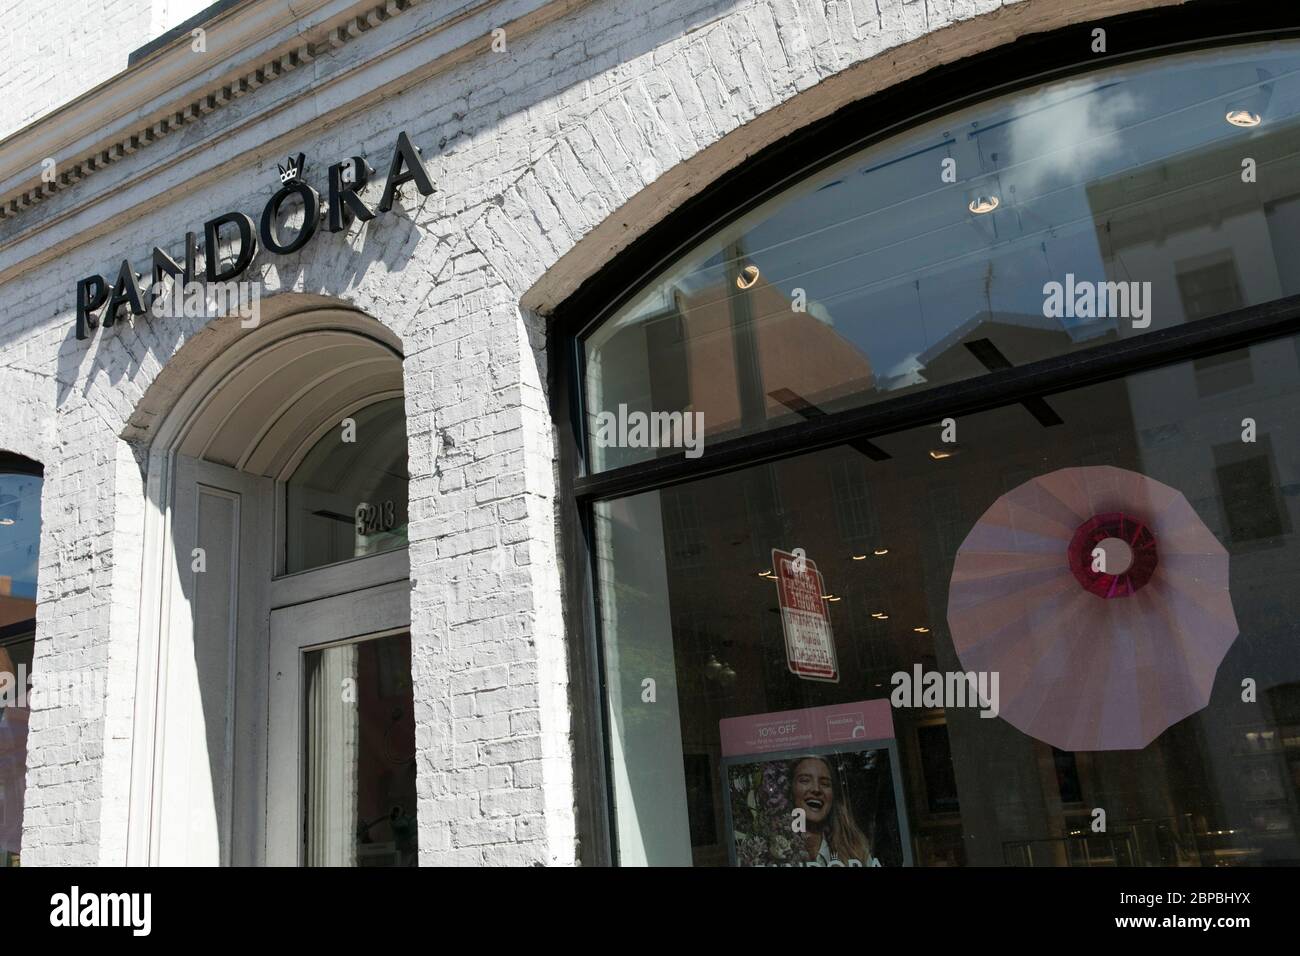 A logo sign outside of a Pandora retail store location in Washington, D.C.,  on May 9, 2020 Stock Photo - Alamy